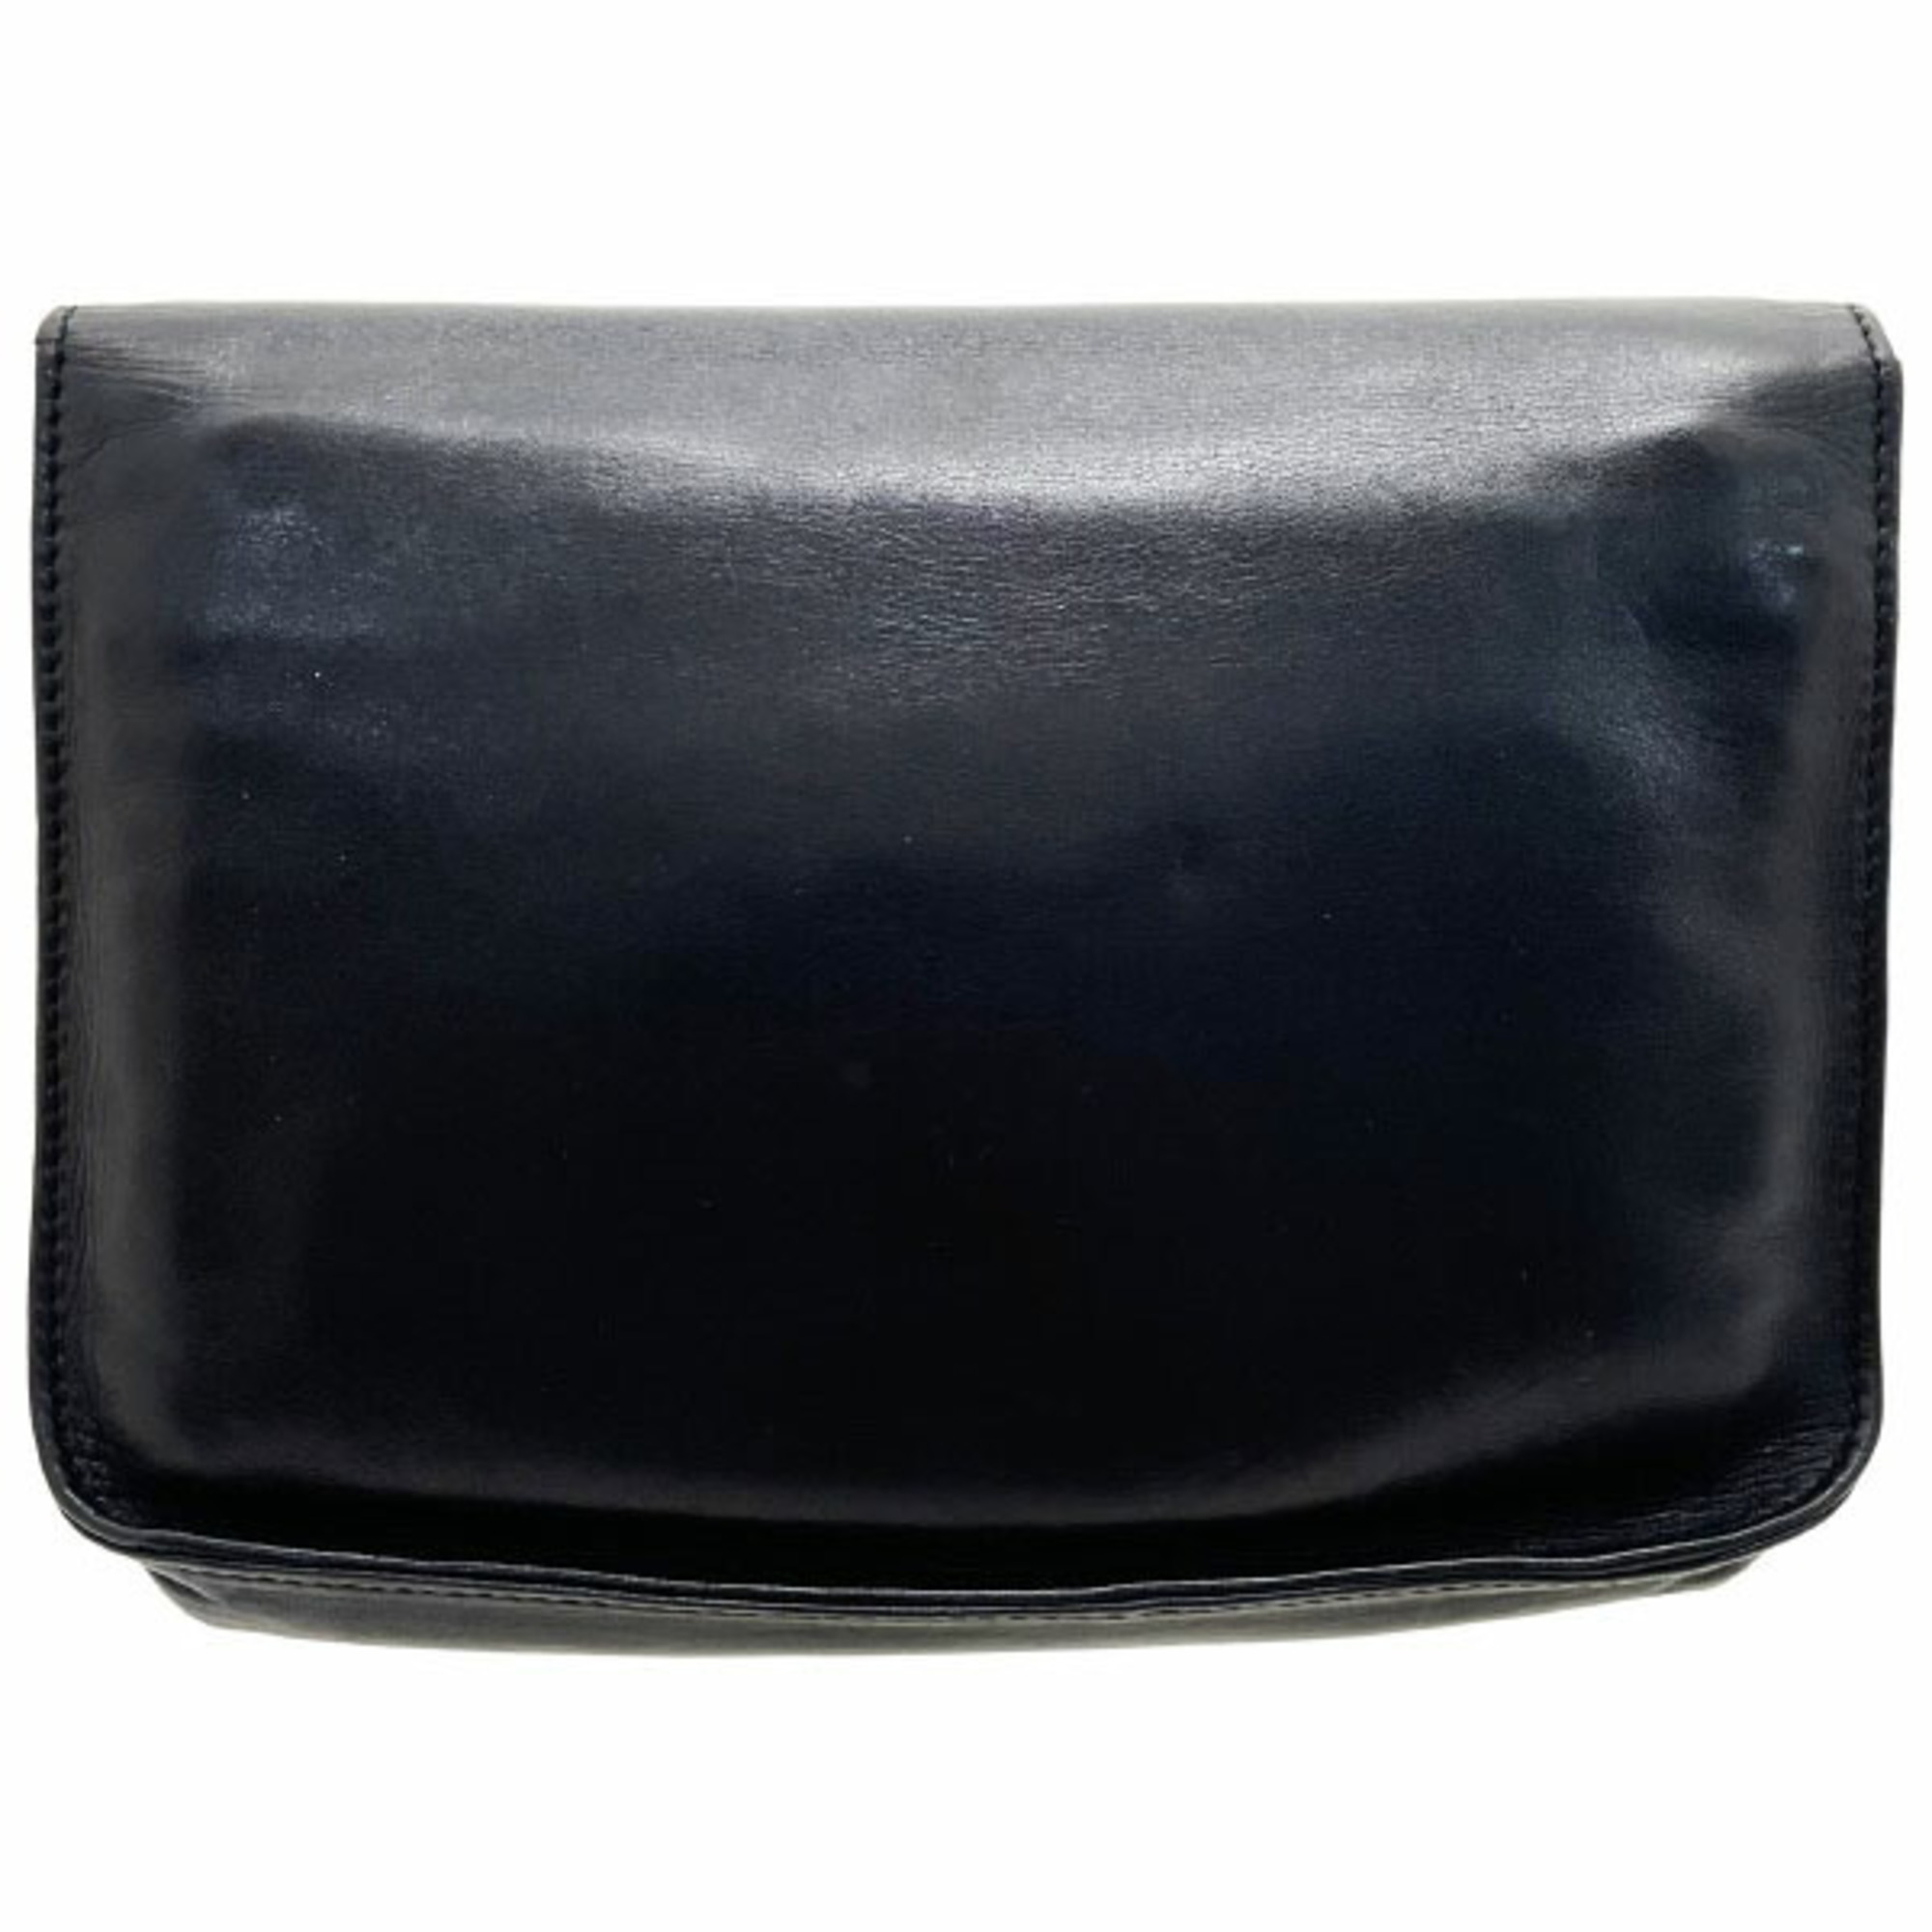 LOEWE Pouch Anagram Multi Leather Black Second Bag Clutch Bag-in-Bag HH-13277